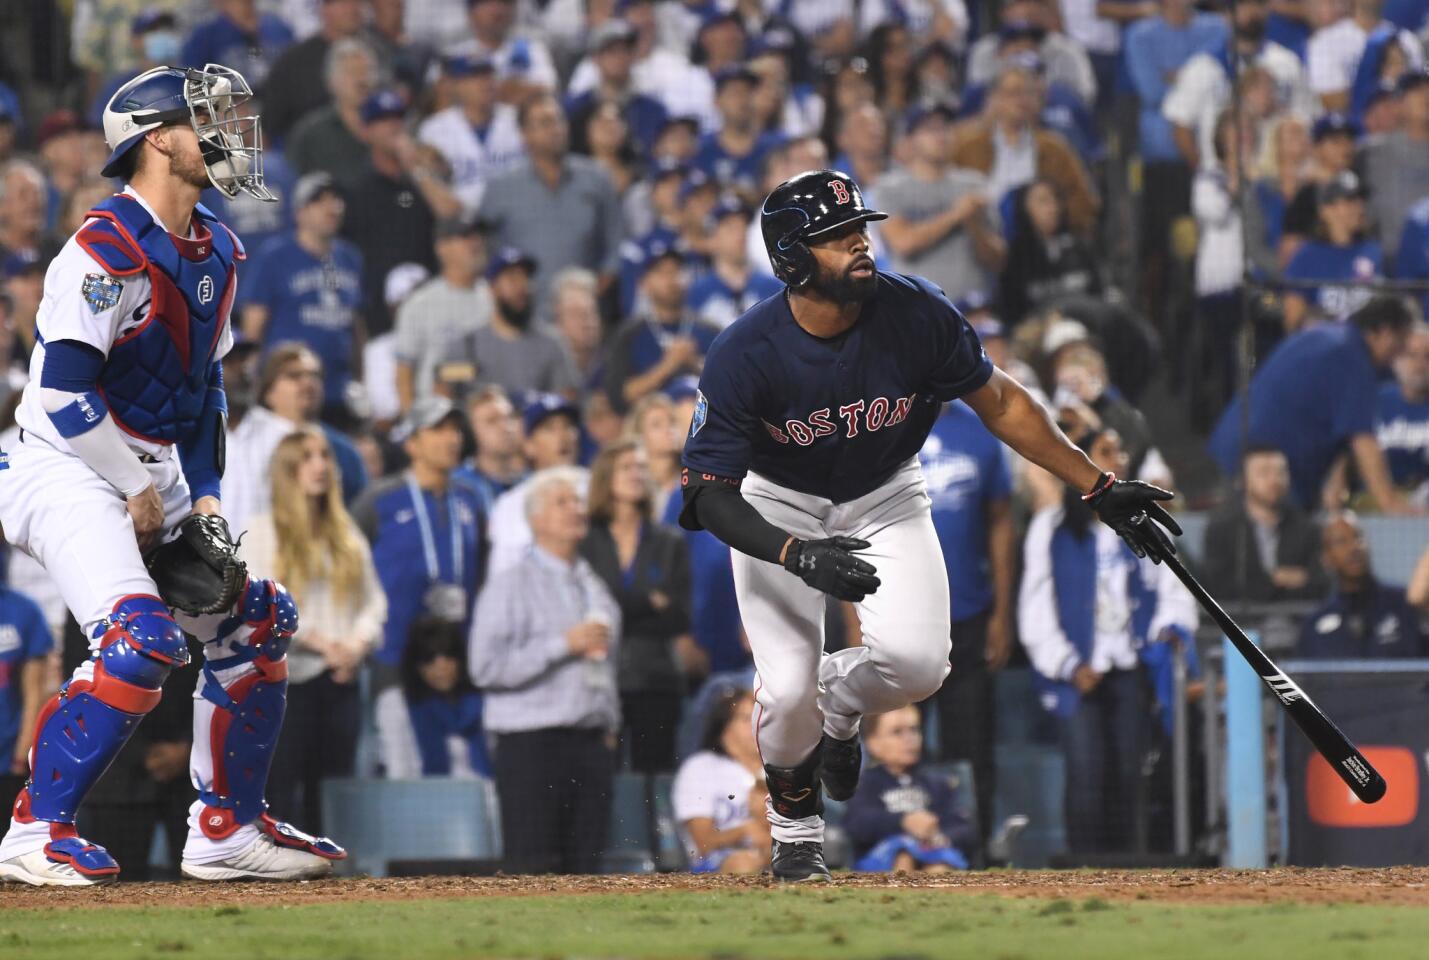 Red Sox Jackie Bradley Jr. hits a solo home run to tie the game against the Dodgers in the 8th inning.